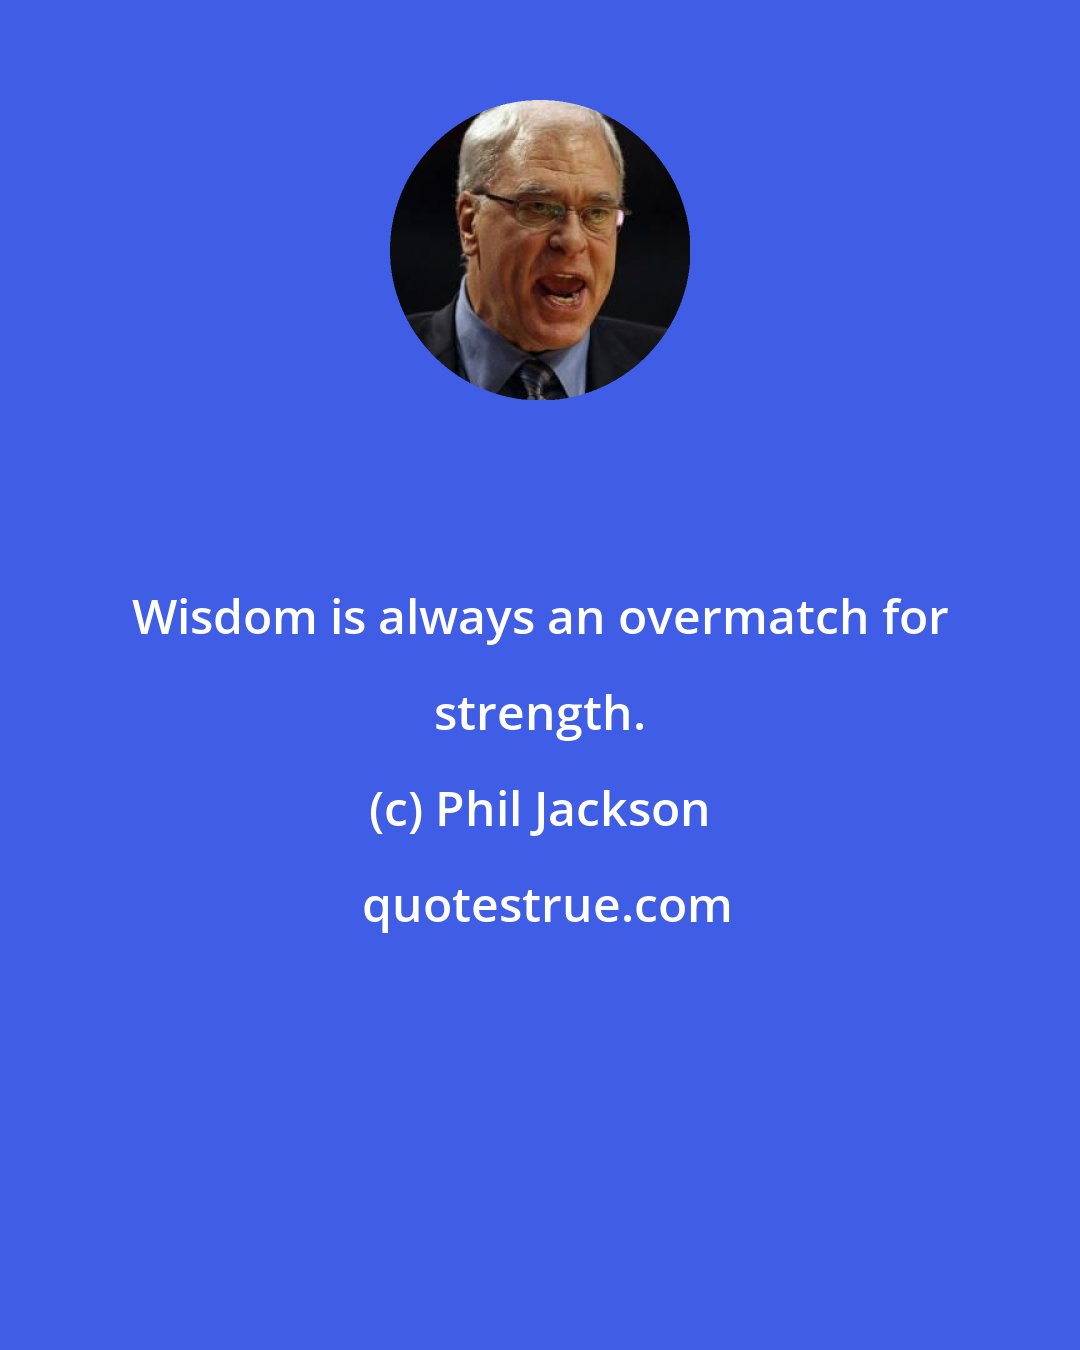 Phil Jackson: Wisdom is always an overmatch for strength.